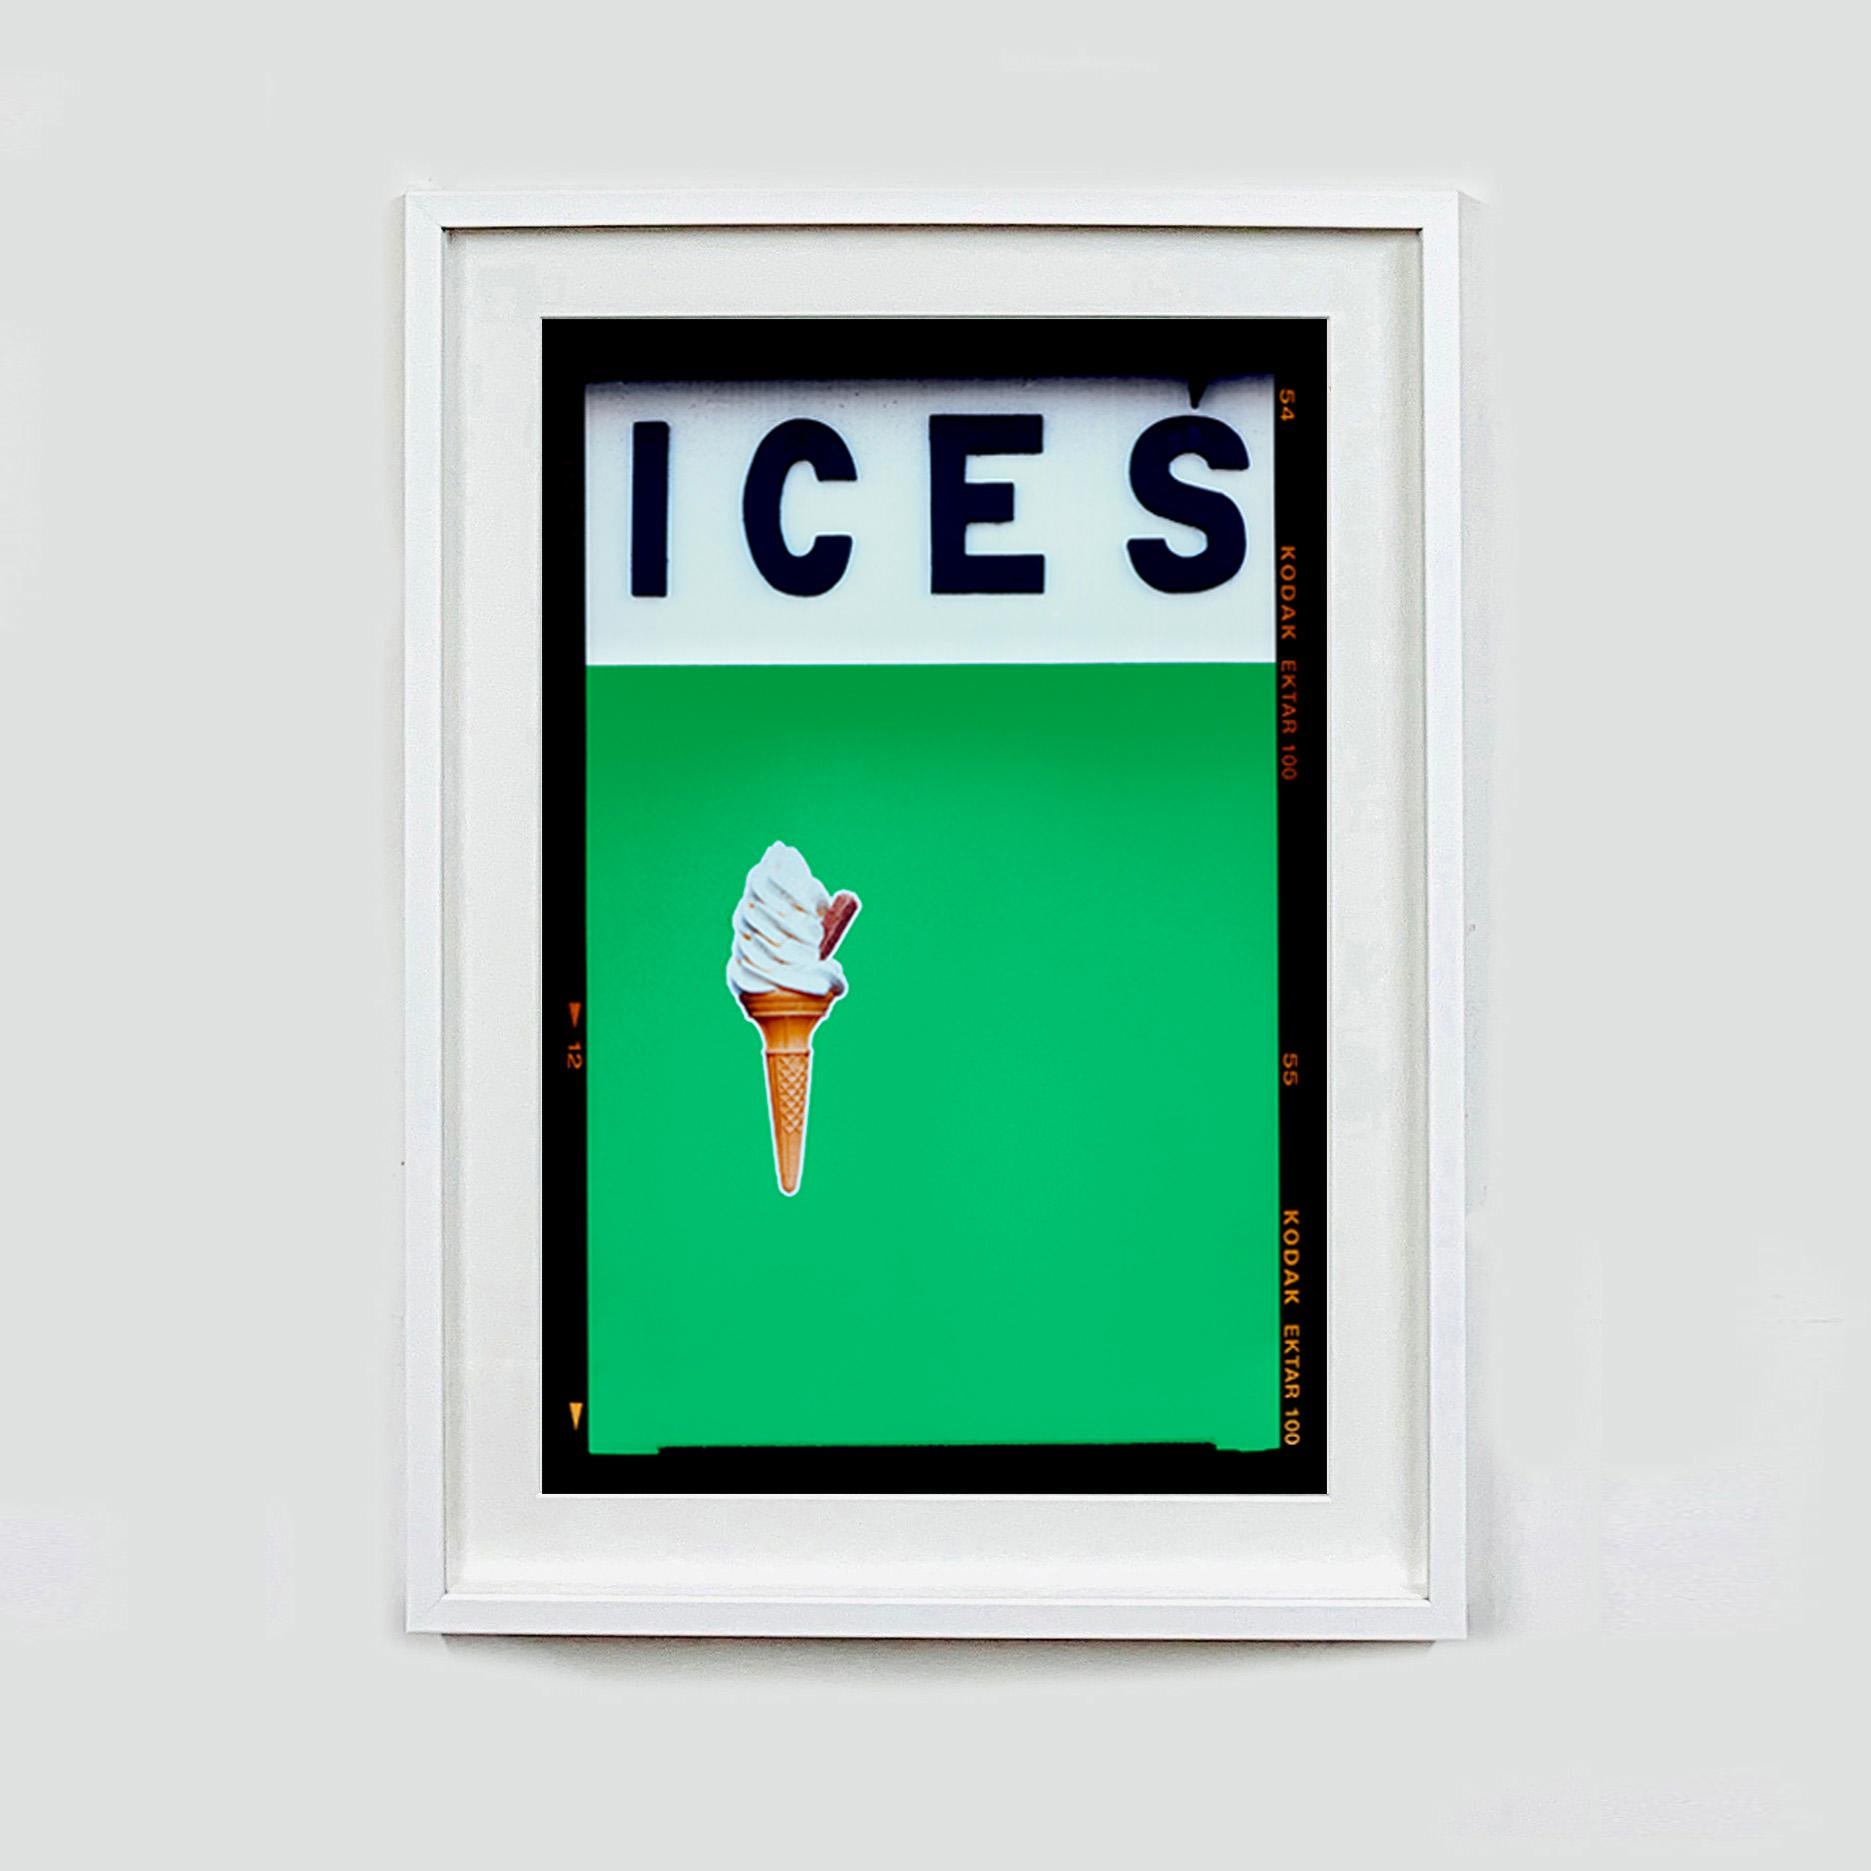 Ices (Green), Bexhill-on-Sea - British seaside color photography - Contemporary Print by Richard Heeps